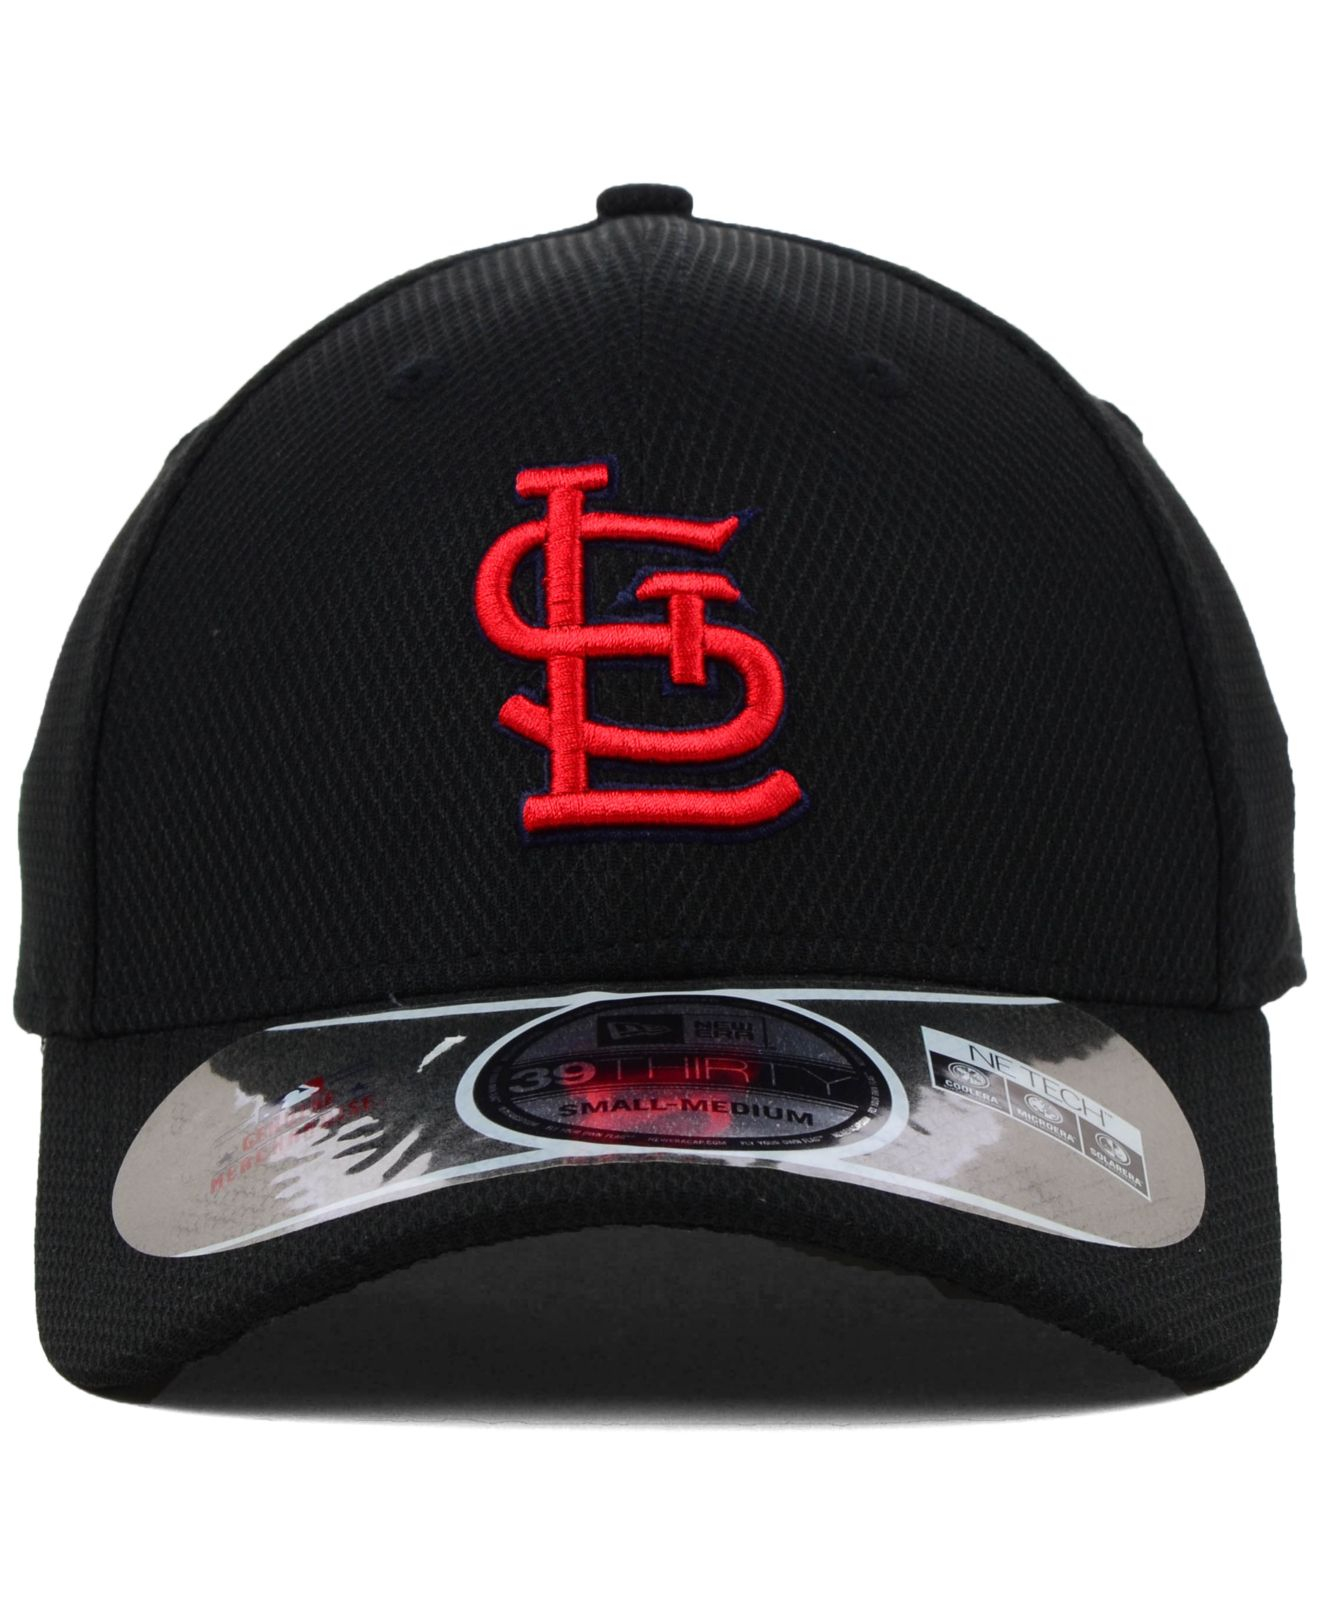 KTZ St. Louis Cardinals Mlb Black And White Fashion 59fifty Cap for Men